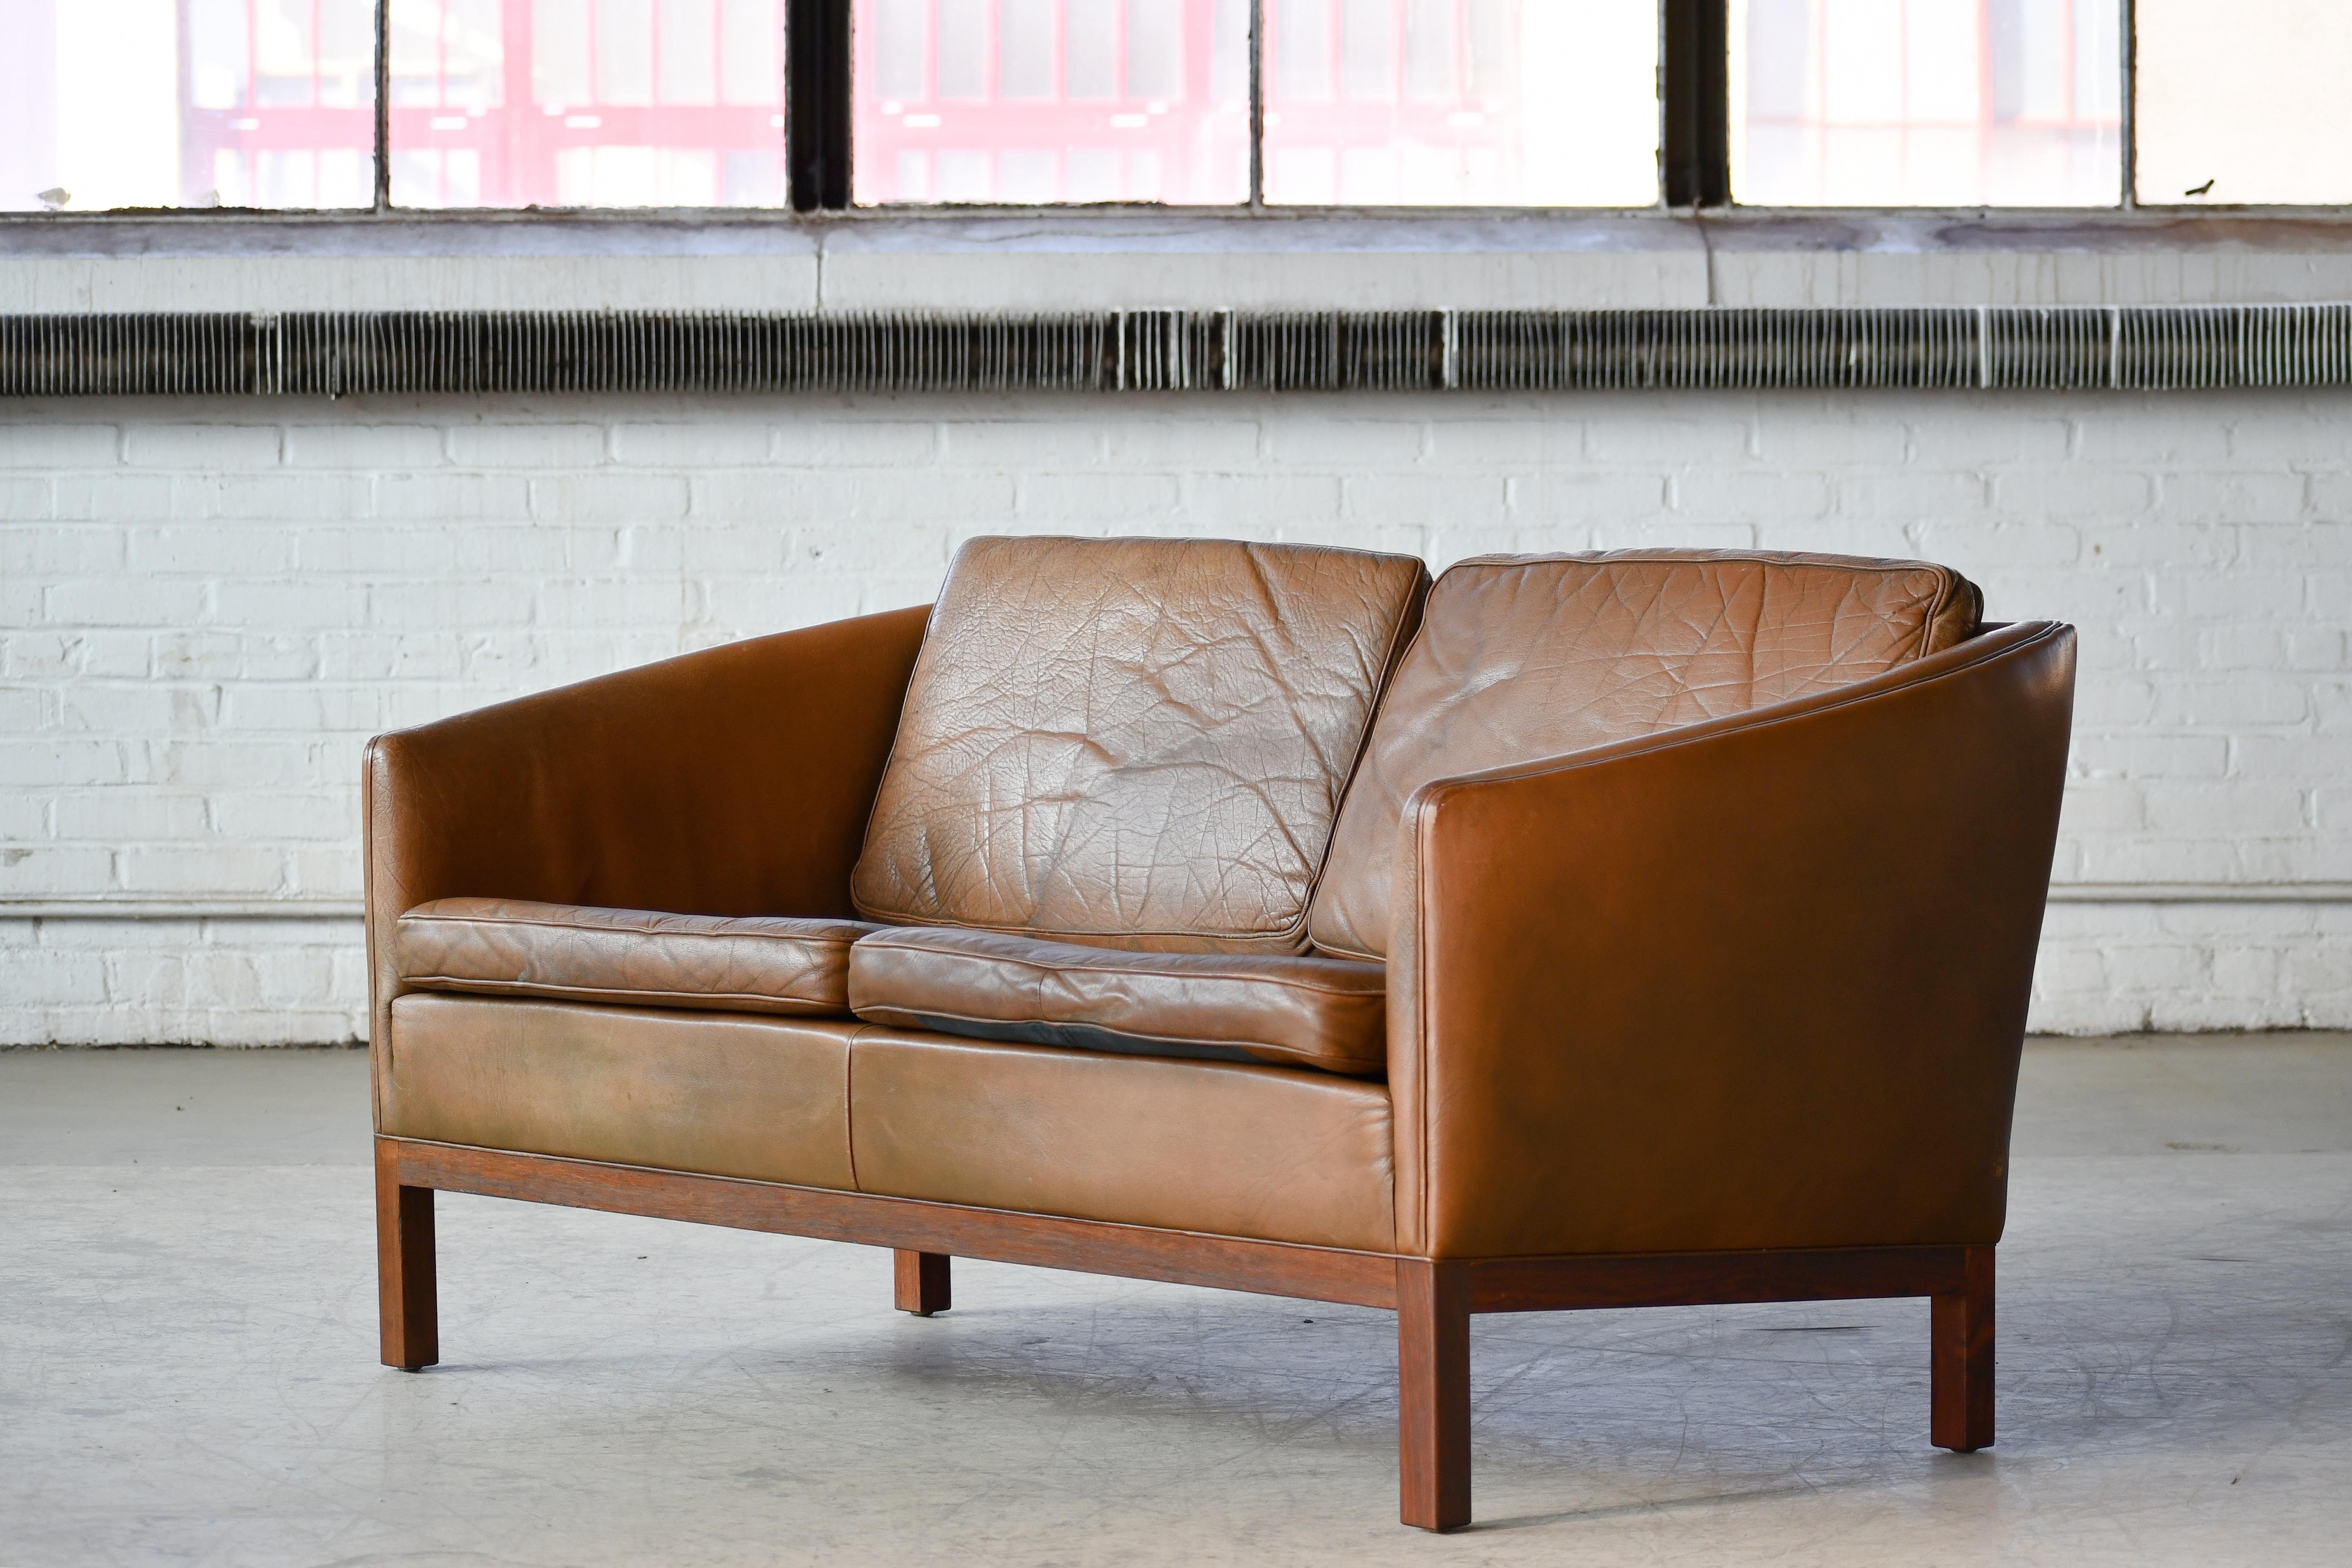 Loveseat by Illum Wikkelso in Cognac Leather and Rosewood Denmark 1960's For Sale 3